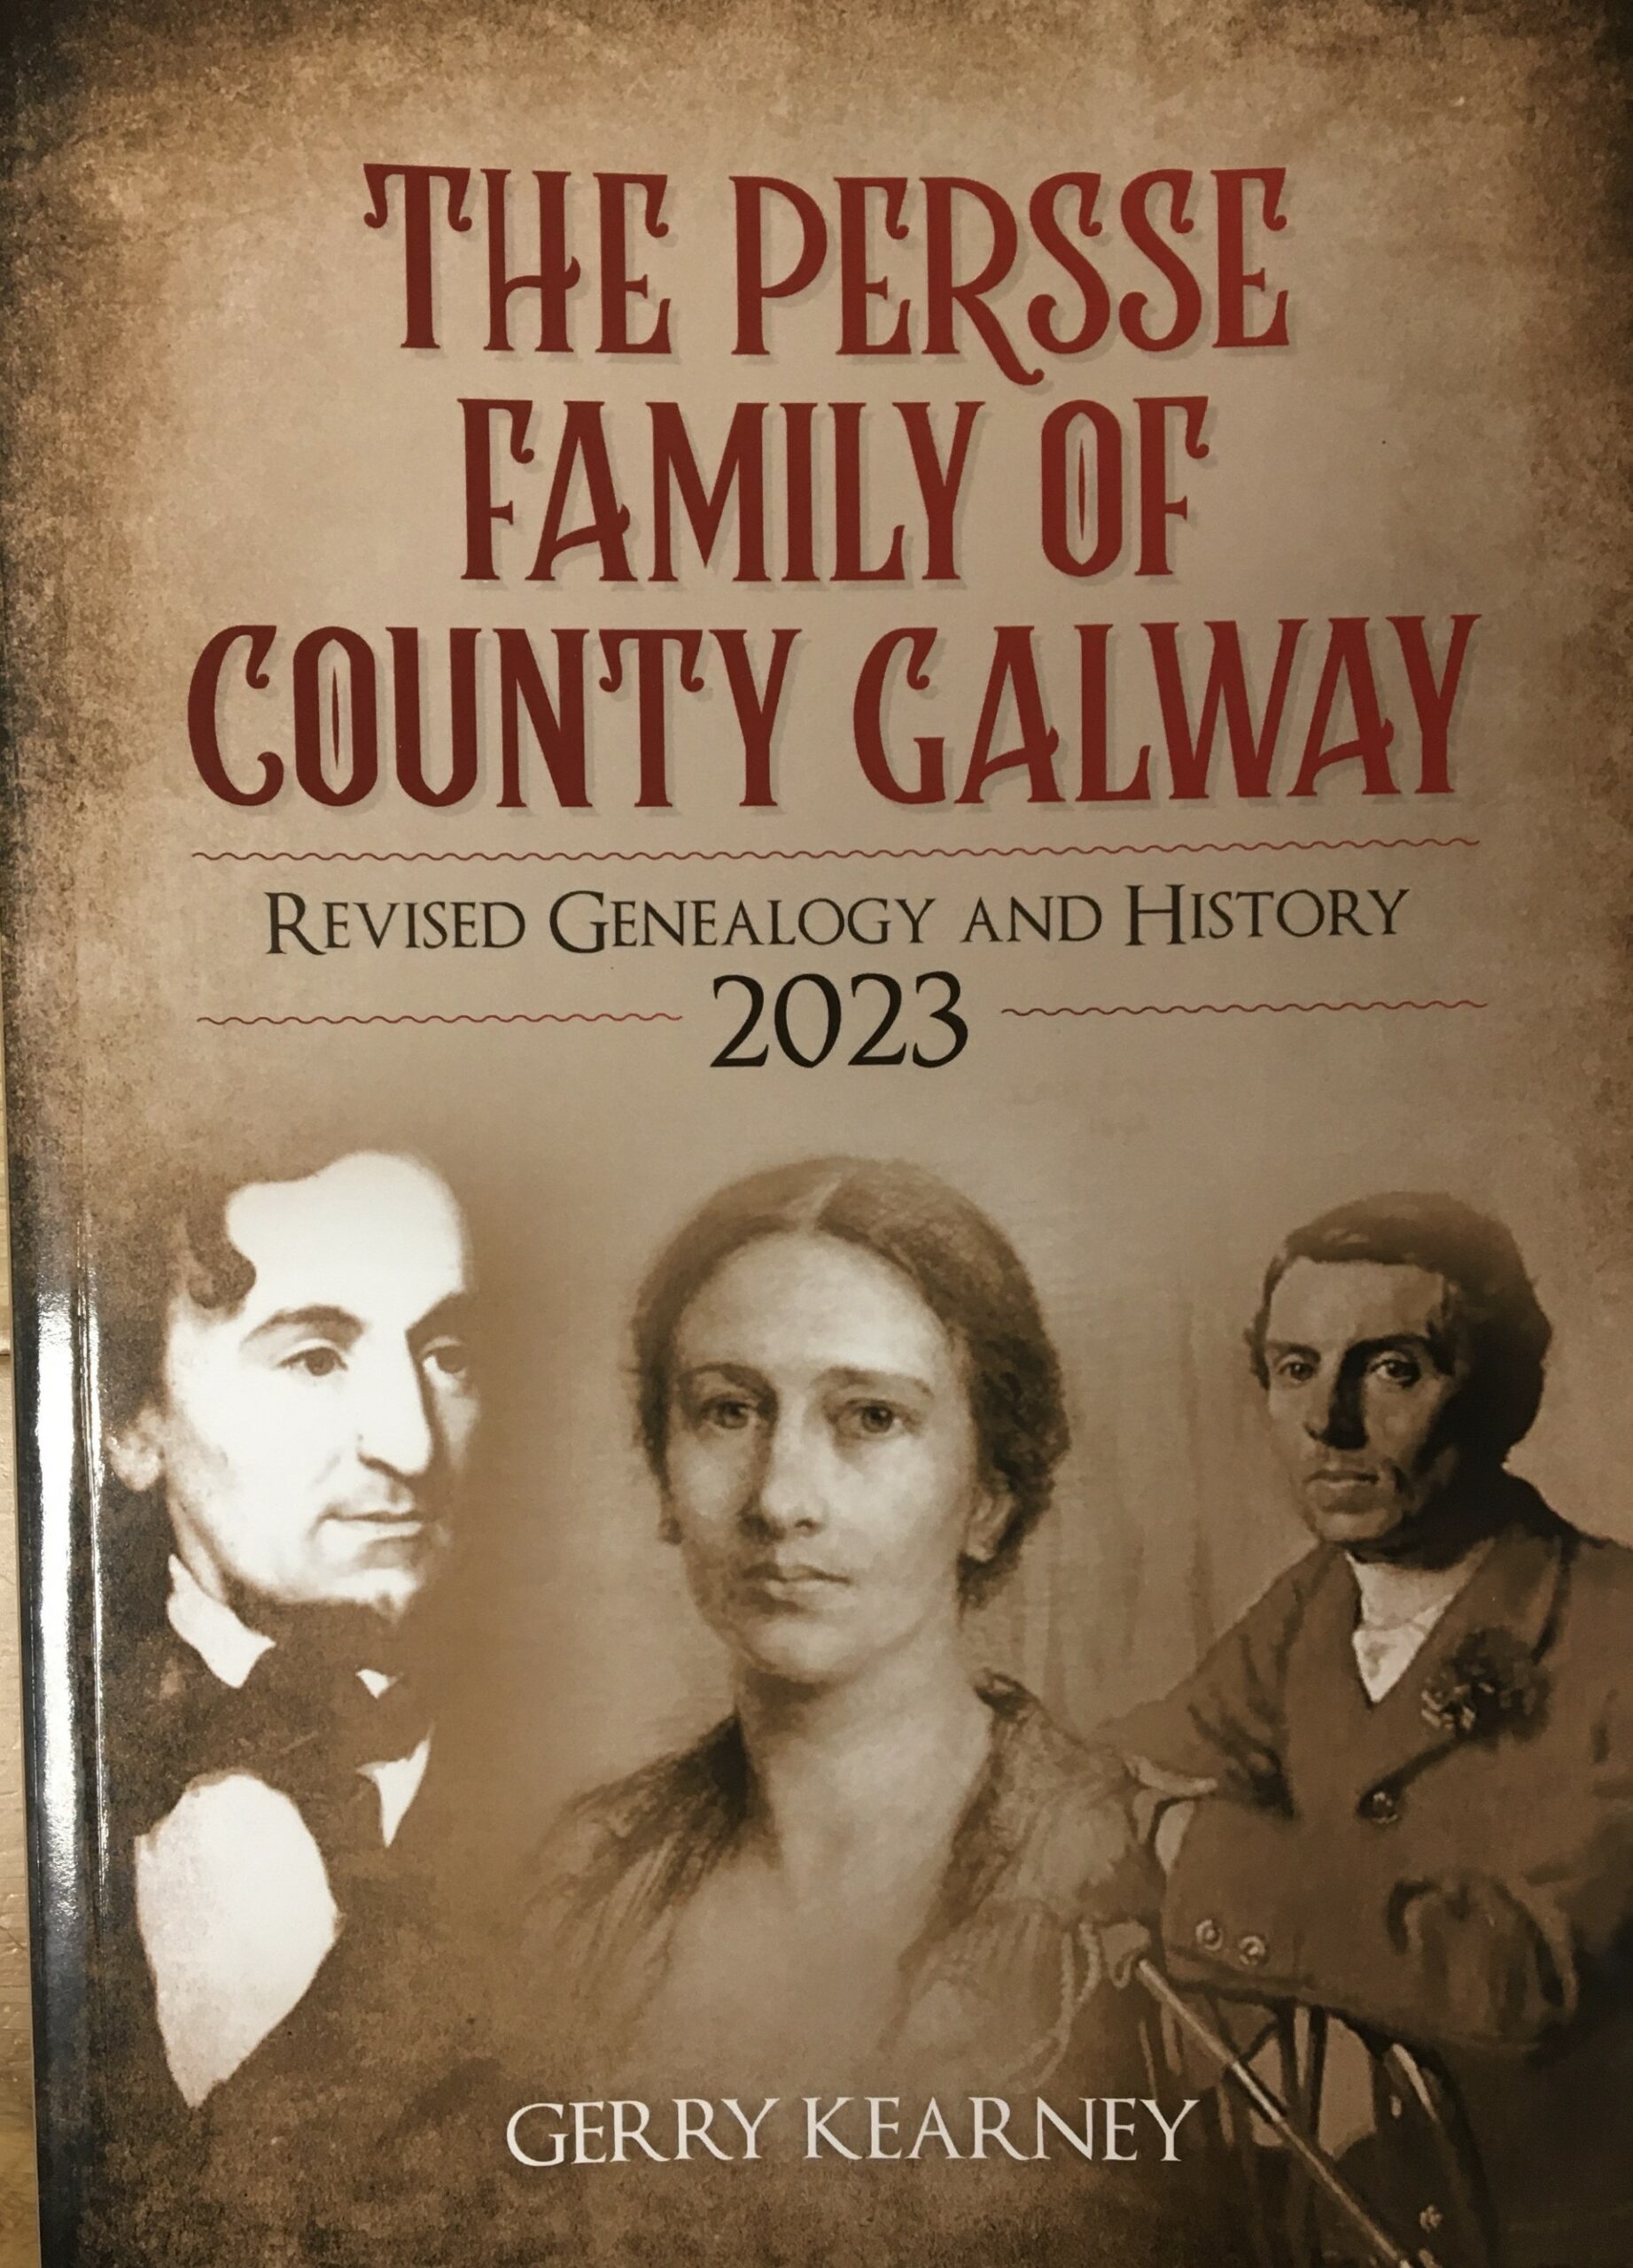 The Persse Family of County Galway : Revised Genealogy and History 2023 by Gerry Kearney